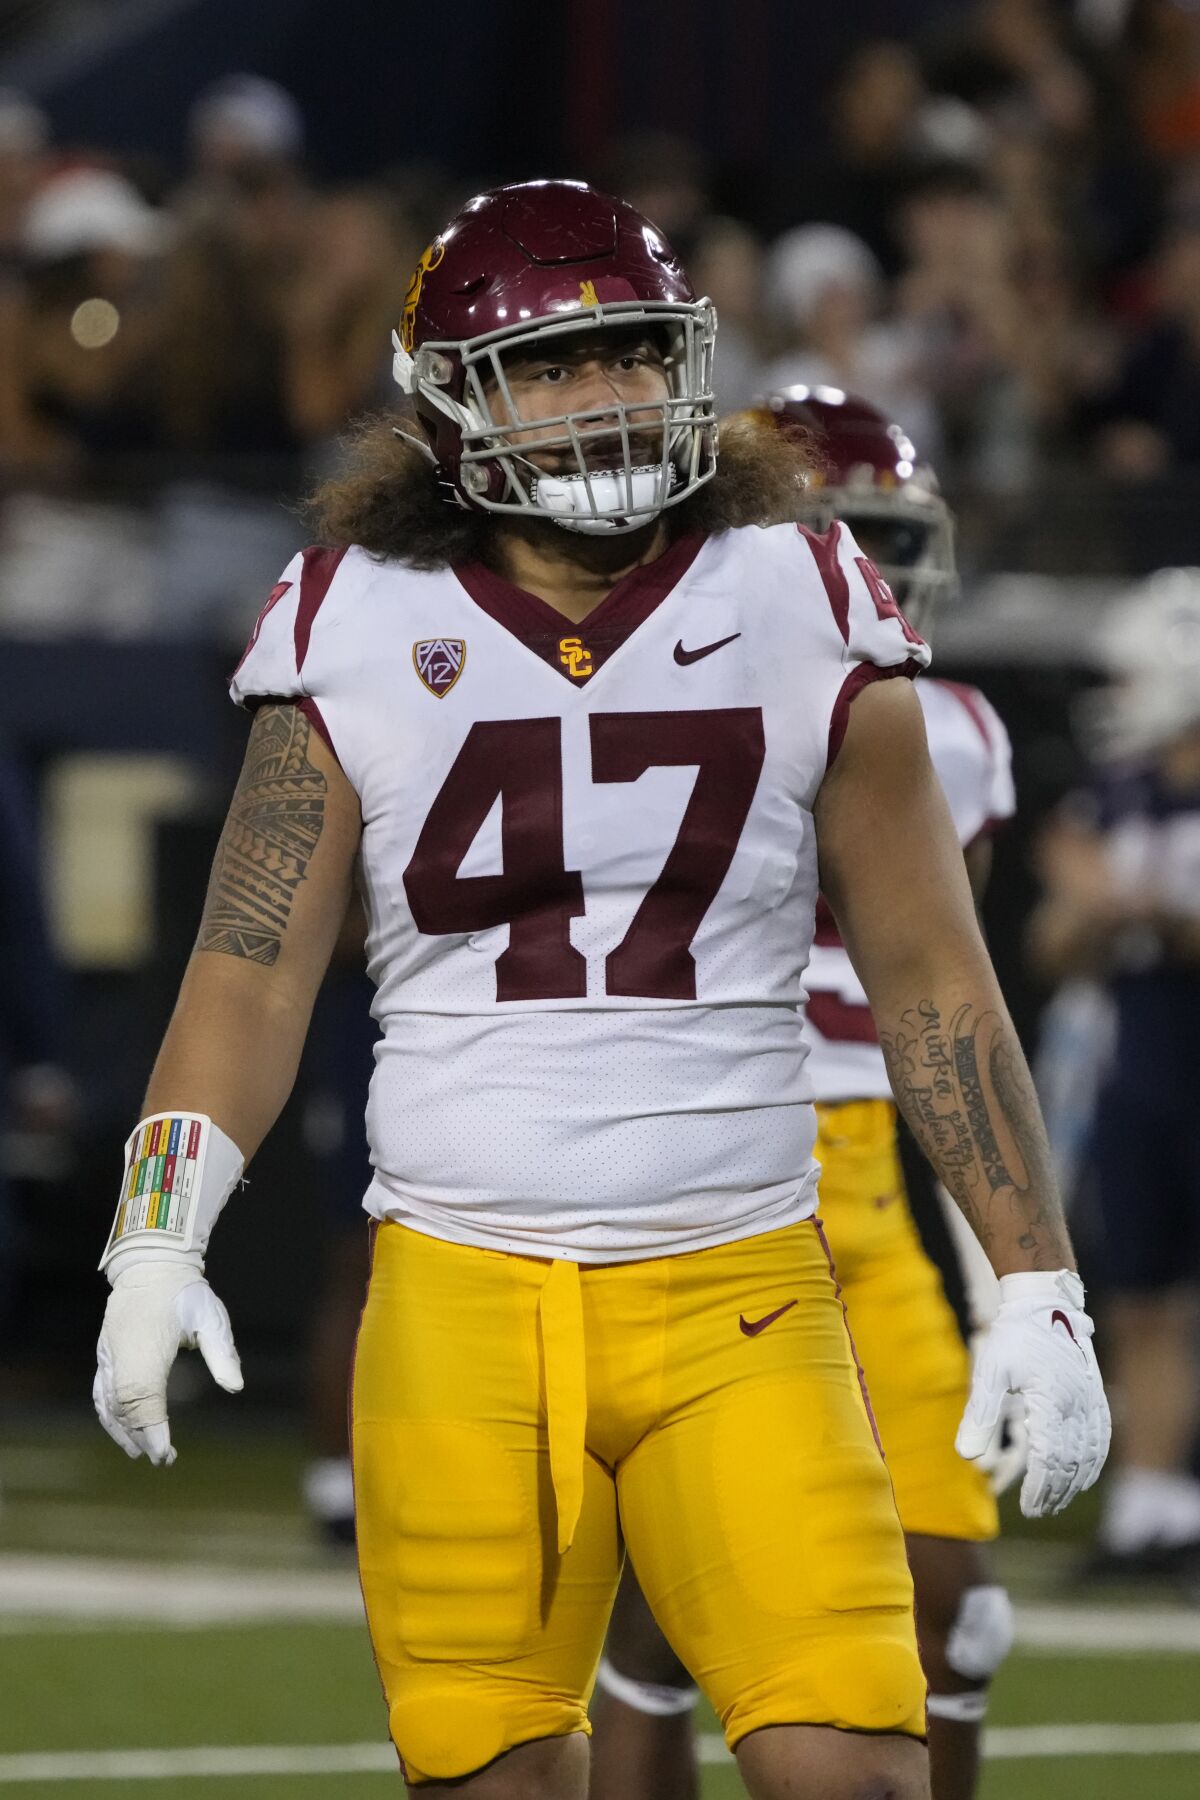 USC defensive lineman Stanley Ta'ufo'ou in the first half against Arizona.